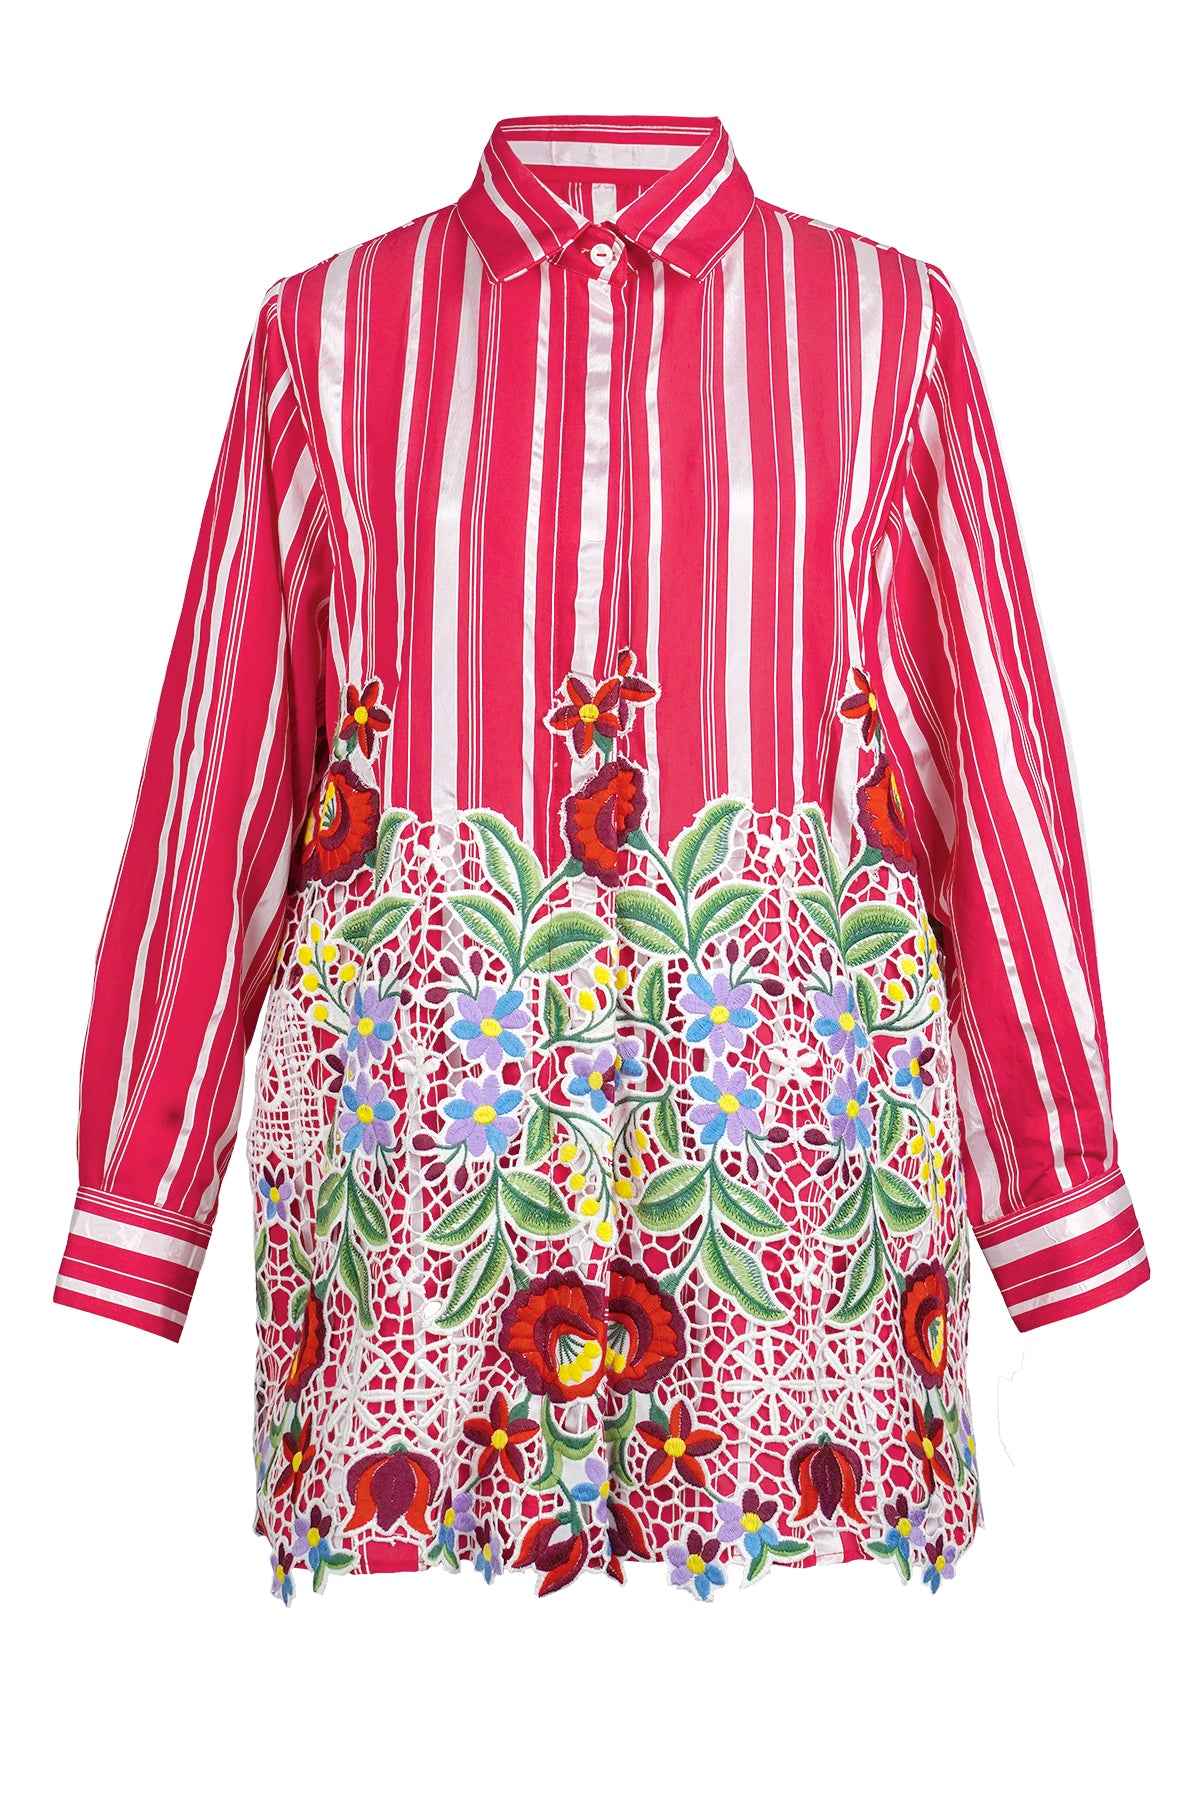 Vala Embroidered Shirt - Red